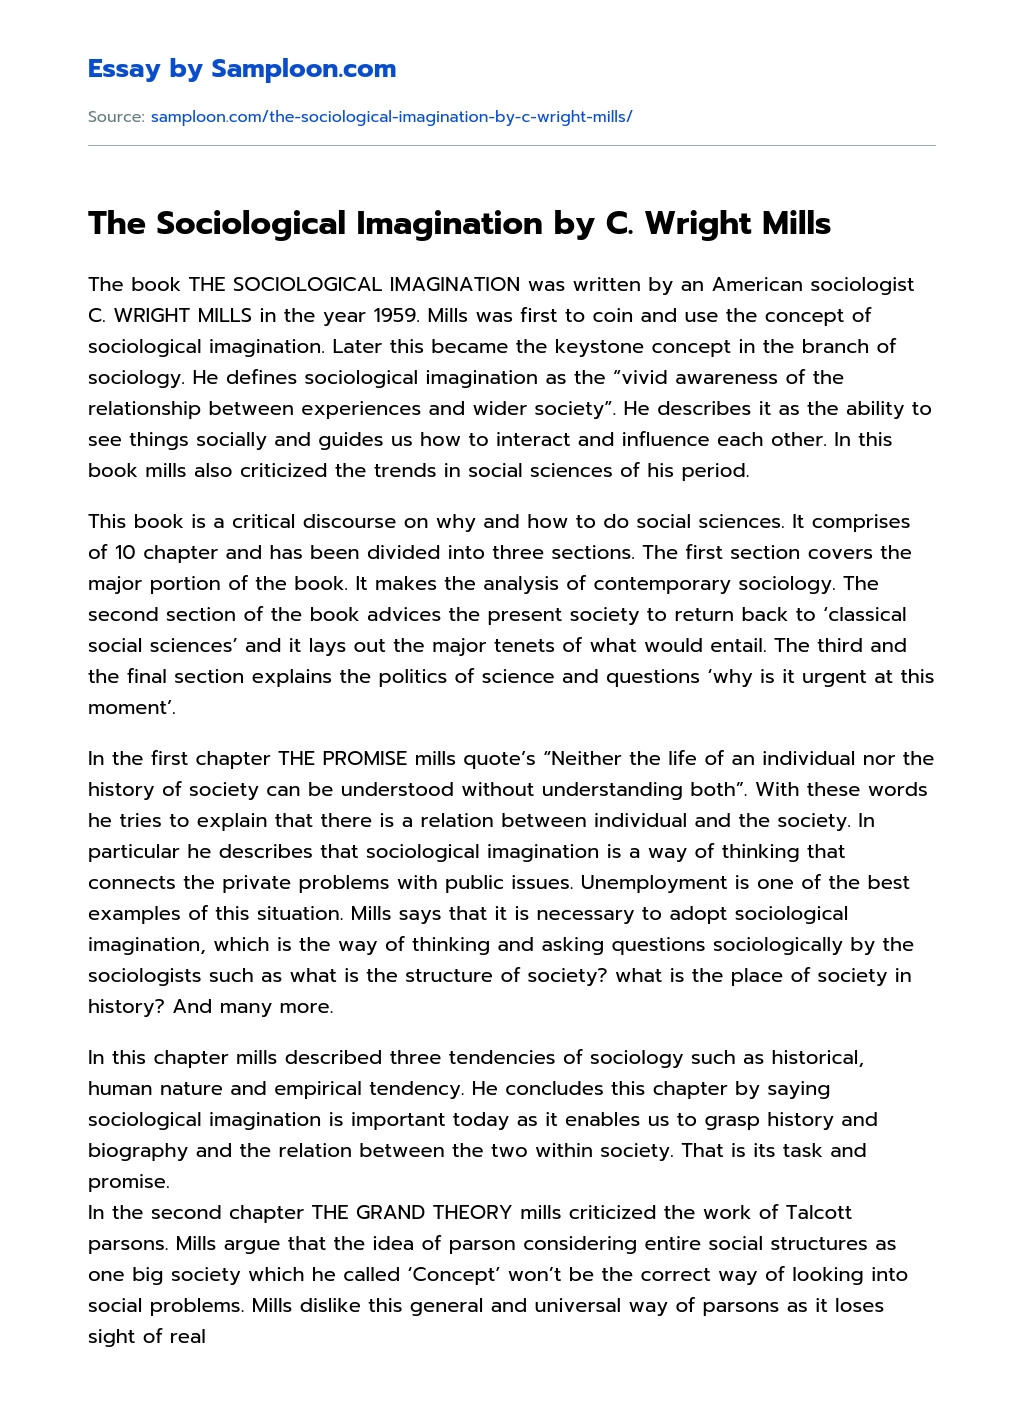 The Sociological Imagination by C. Wright Mills Analytical Essay essay